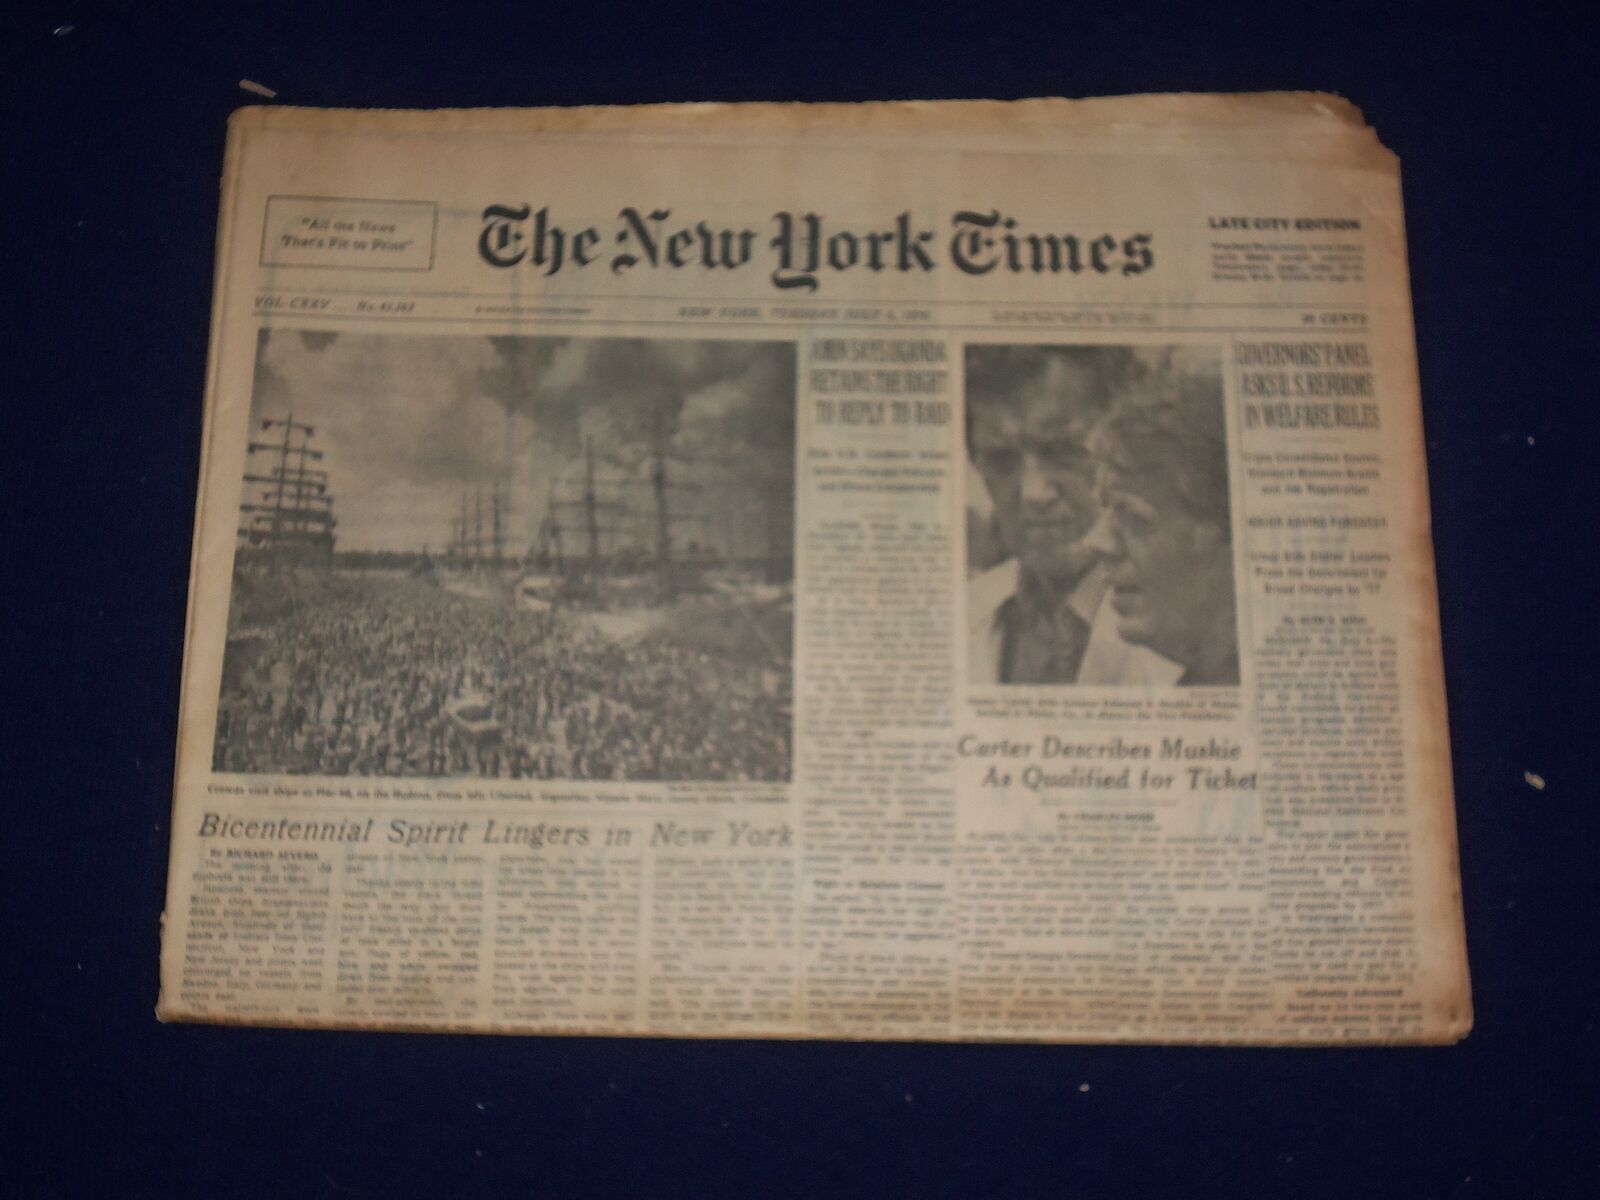 1976 JULY 6 THE NEW YORK TIMES - CARTER SAYS MUSKIE QUALIFIED FOR VP - NP 3006